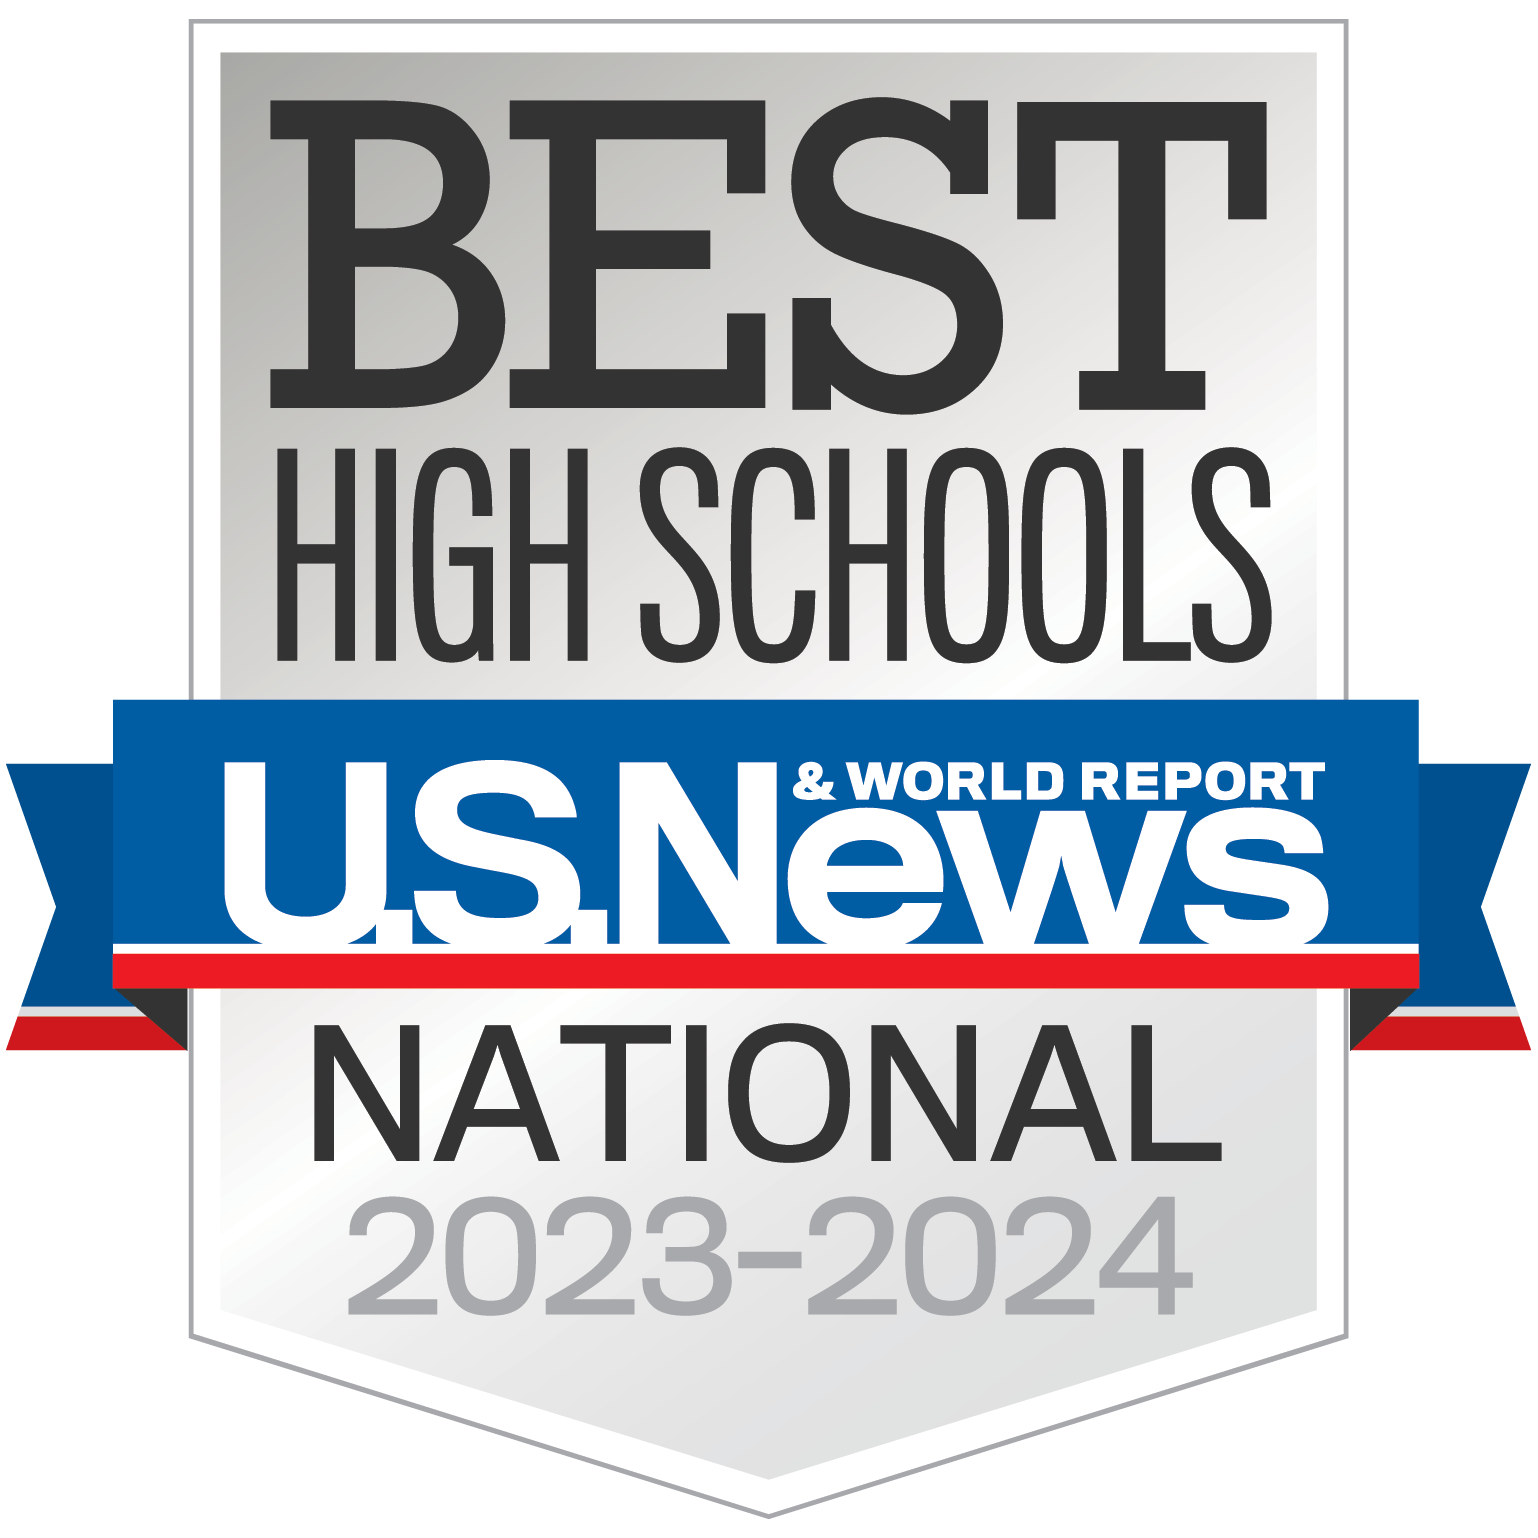 Award Image. Text reads Best High Schools, US News and World Report, National 2023